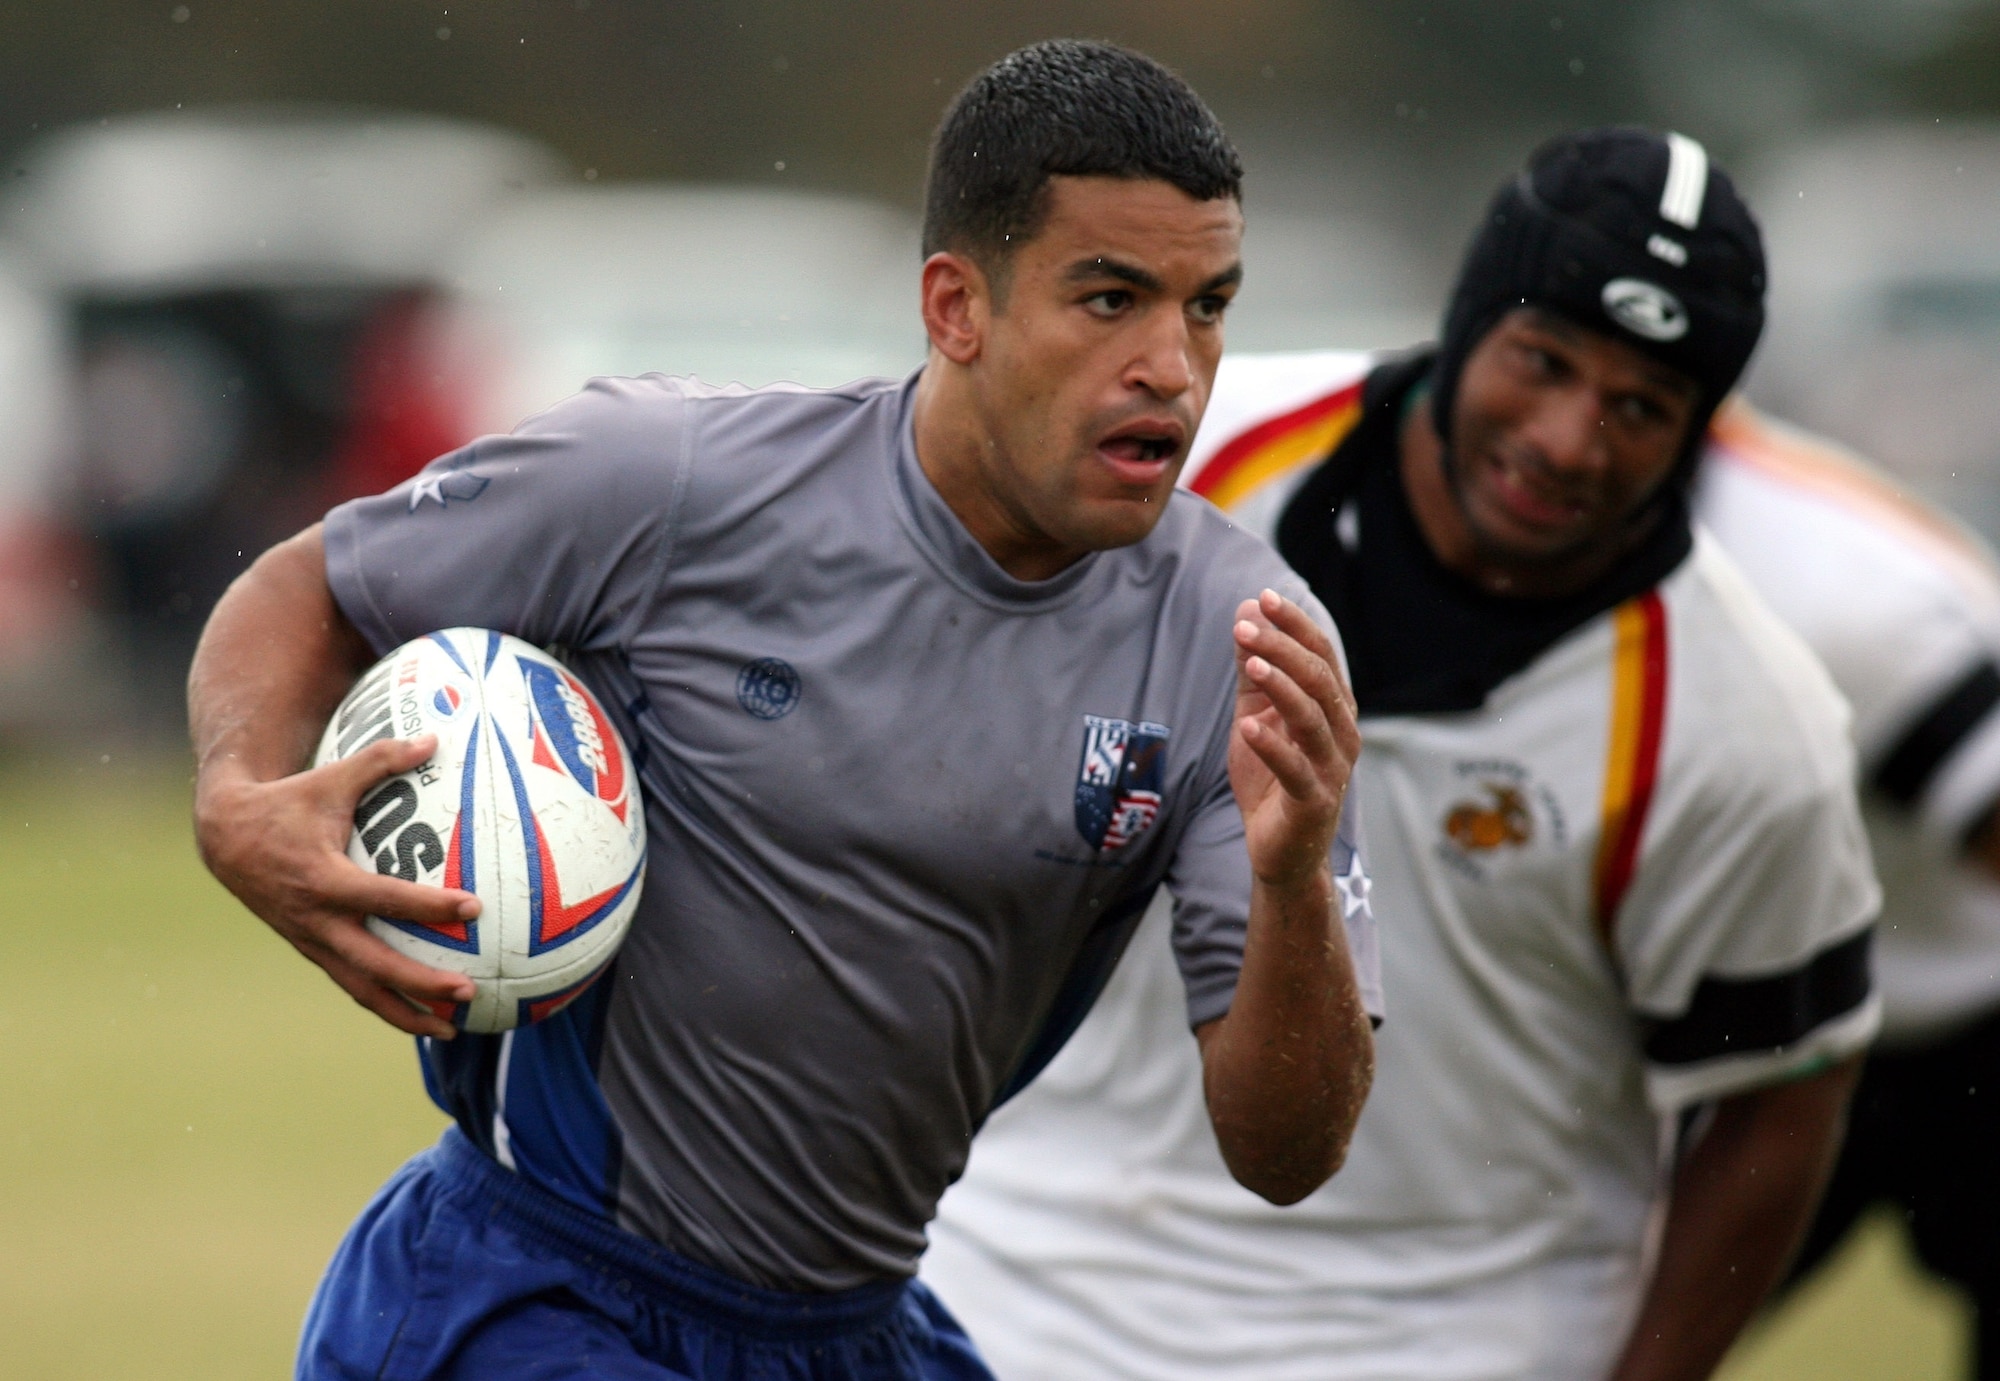 Air Force 1st Lt. David Pina runs past Army defenders during their match Oct. 23 at the Armed Forces Rugby Championship at Camp Lejeune, N.C.  The Air Force team, which went on to win its third consecutive tournament title, edged the Army team 5-3.  (U.S. Air Force photo/Major Scott Foley)